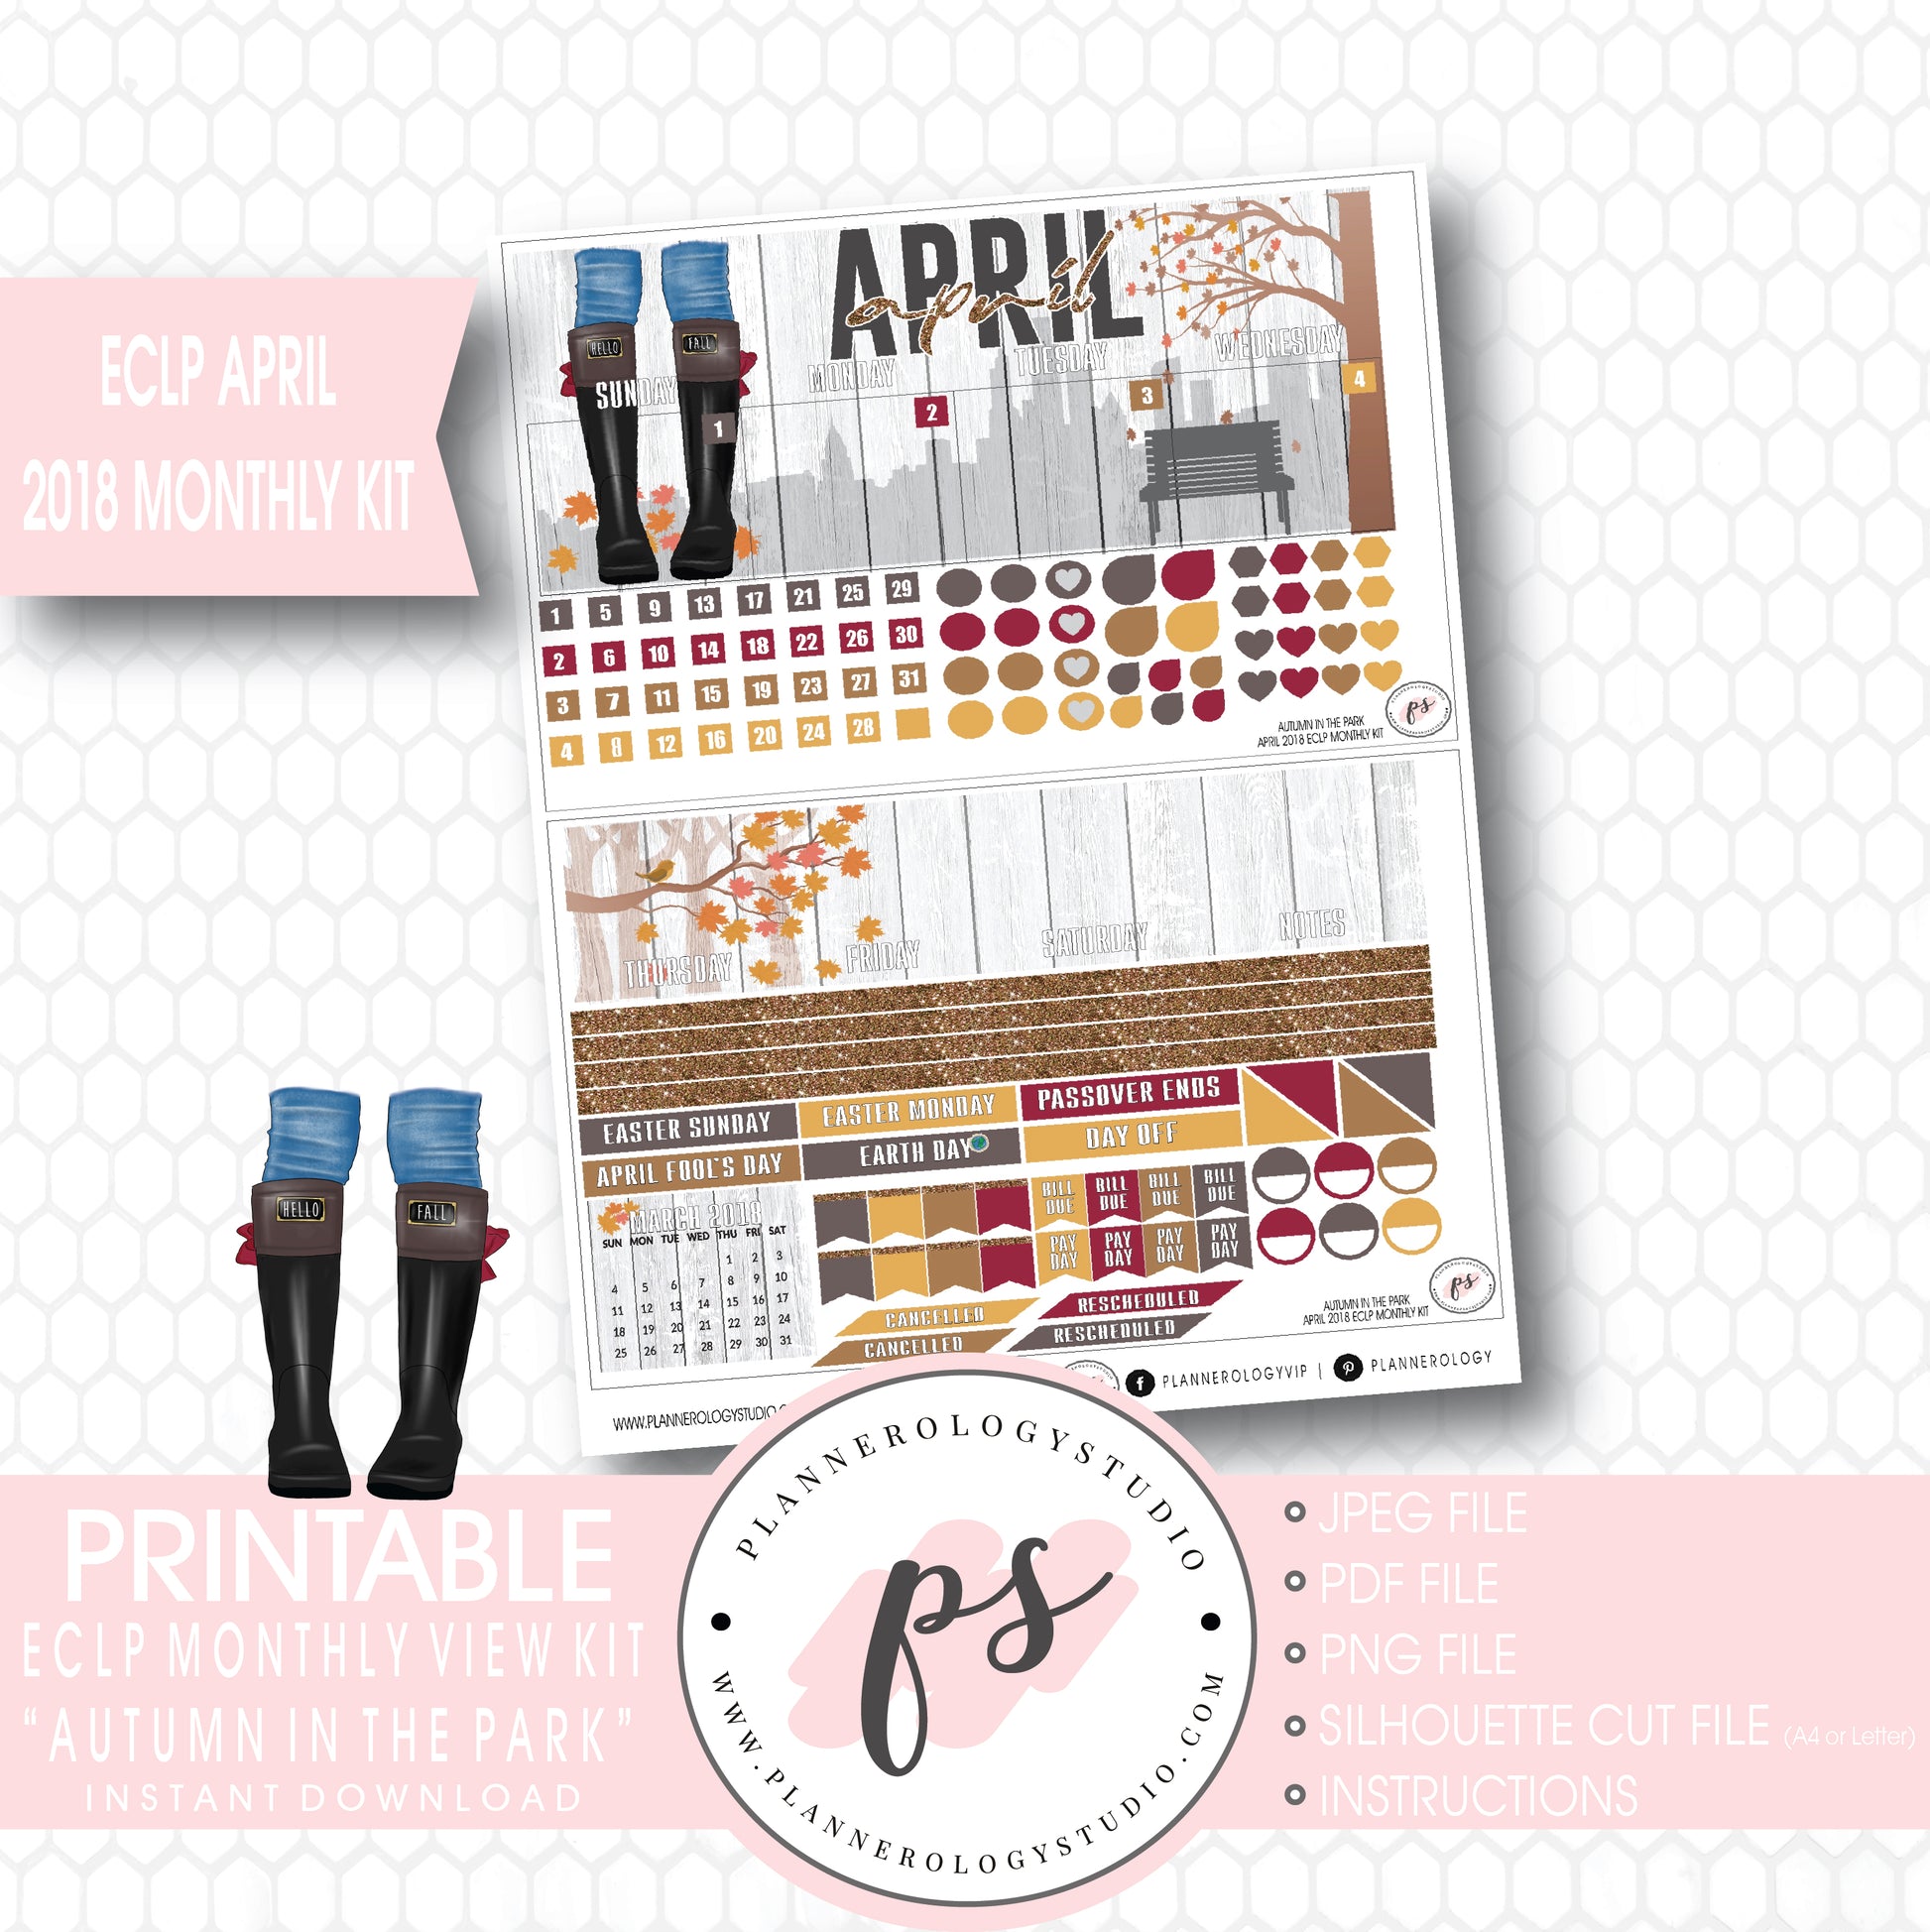 Autumn in the Park April 2018 Monthly View Kit Digital Printable Planner Stickers (for use with Erin Condren) - Plannerologystudio